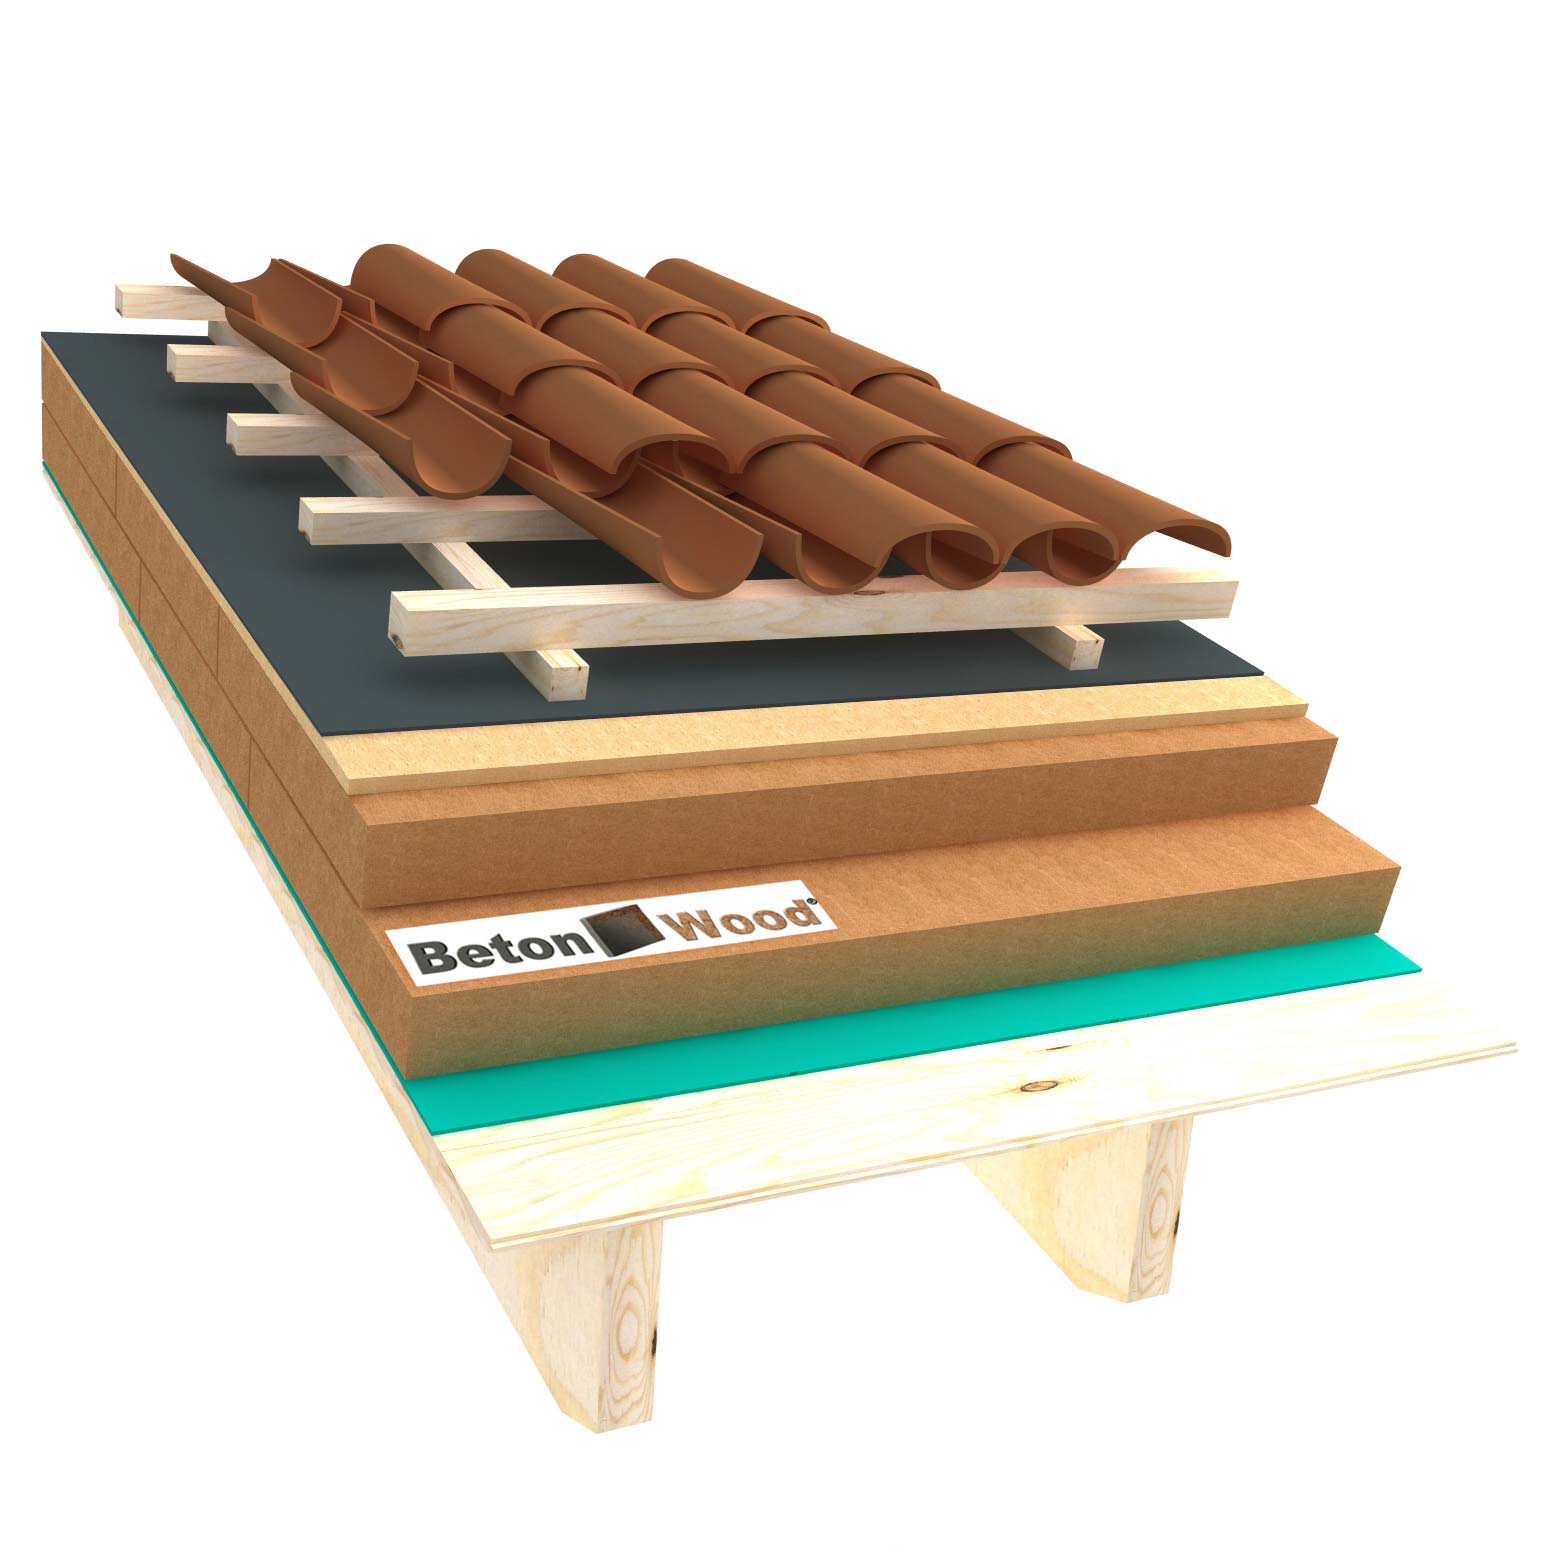 Ventilated roof with wood fiber Isorel and Universal dry on matchboarding